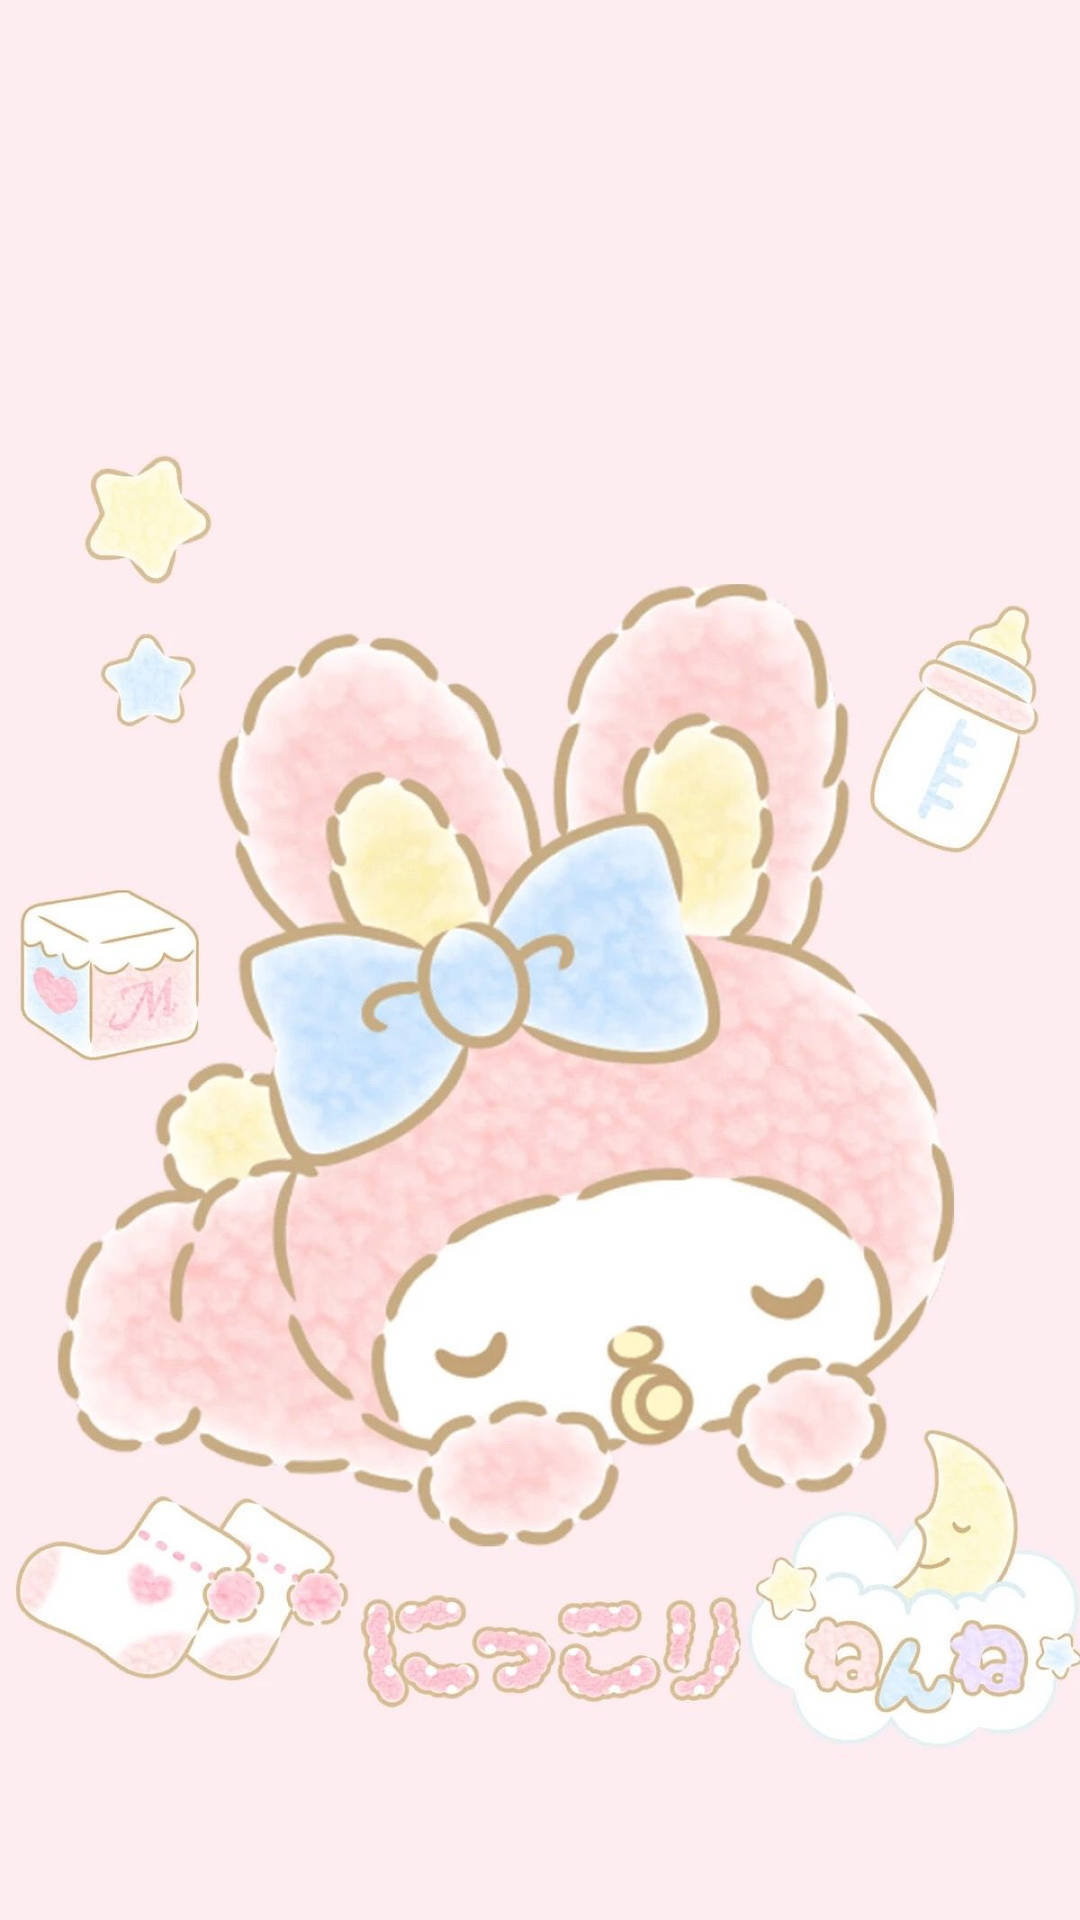 Show your love for Sanrio characters with this cute wallpaper Wallpaper